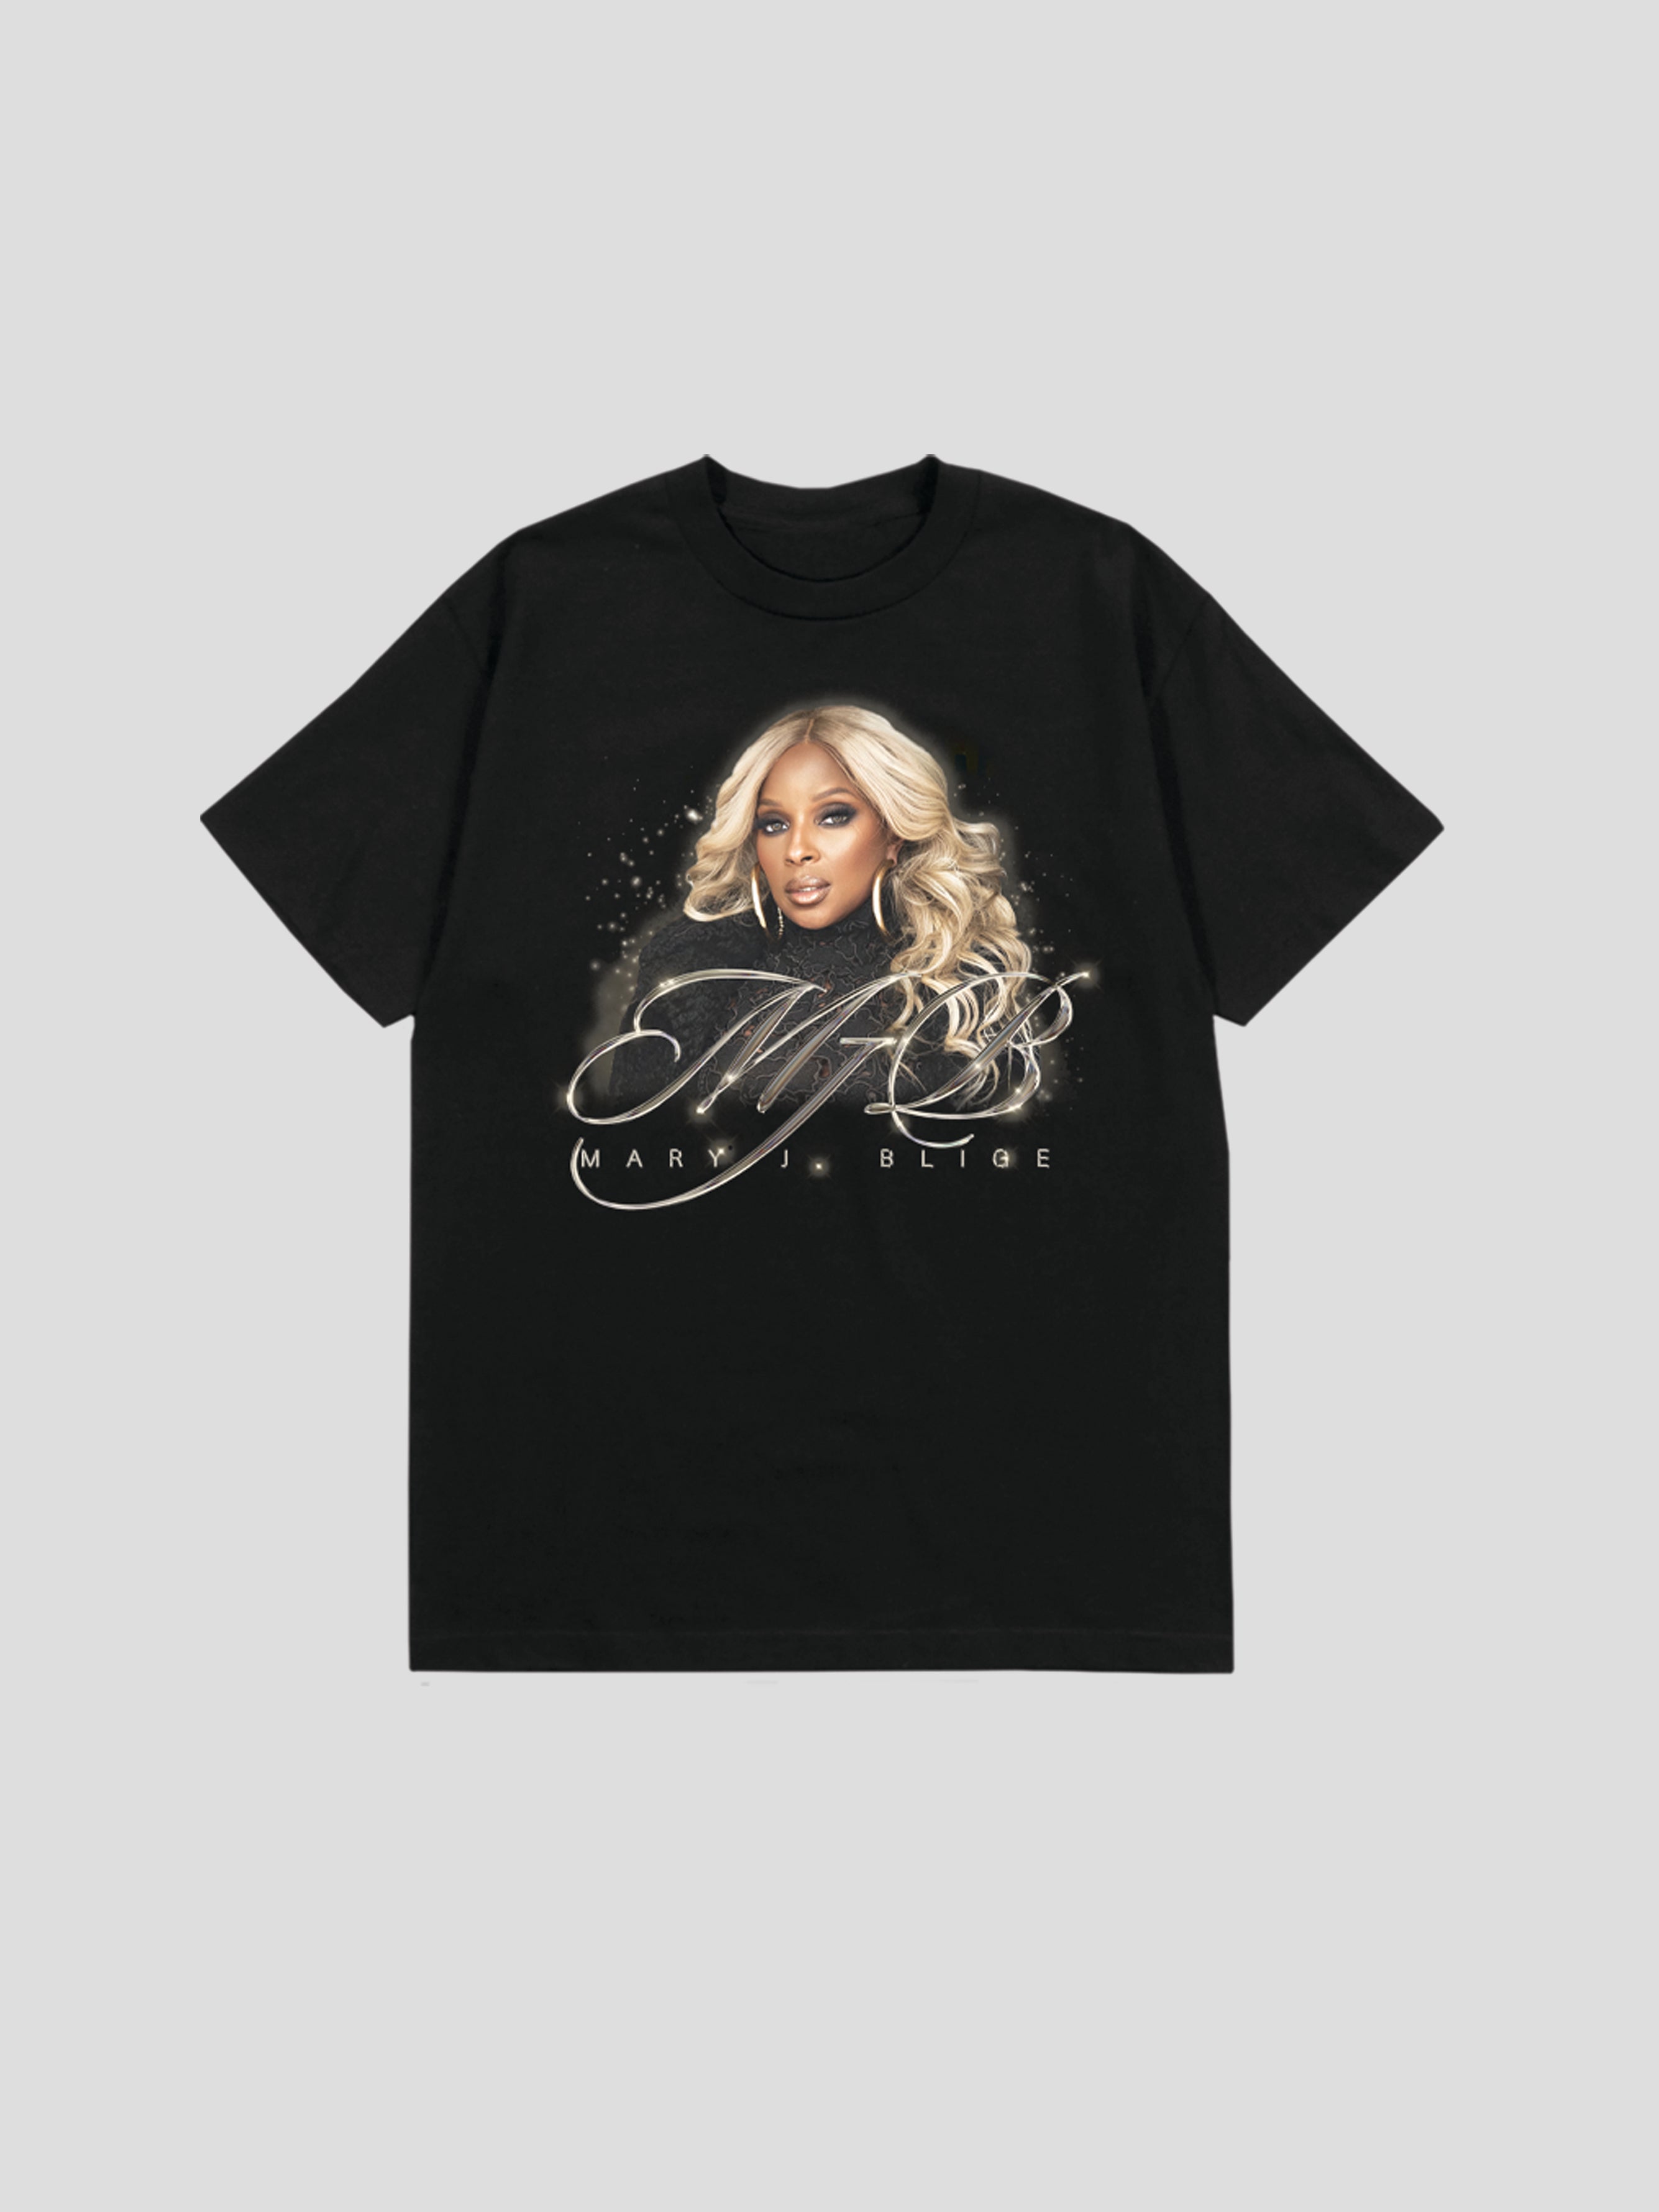 Photo Glow T-Shirt - Mary J. Blige Official Store